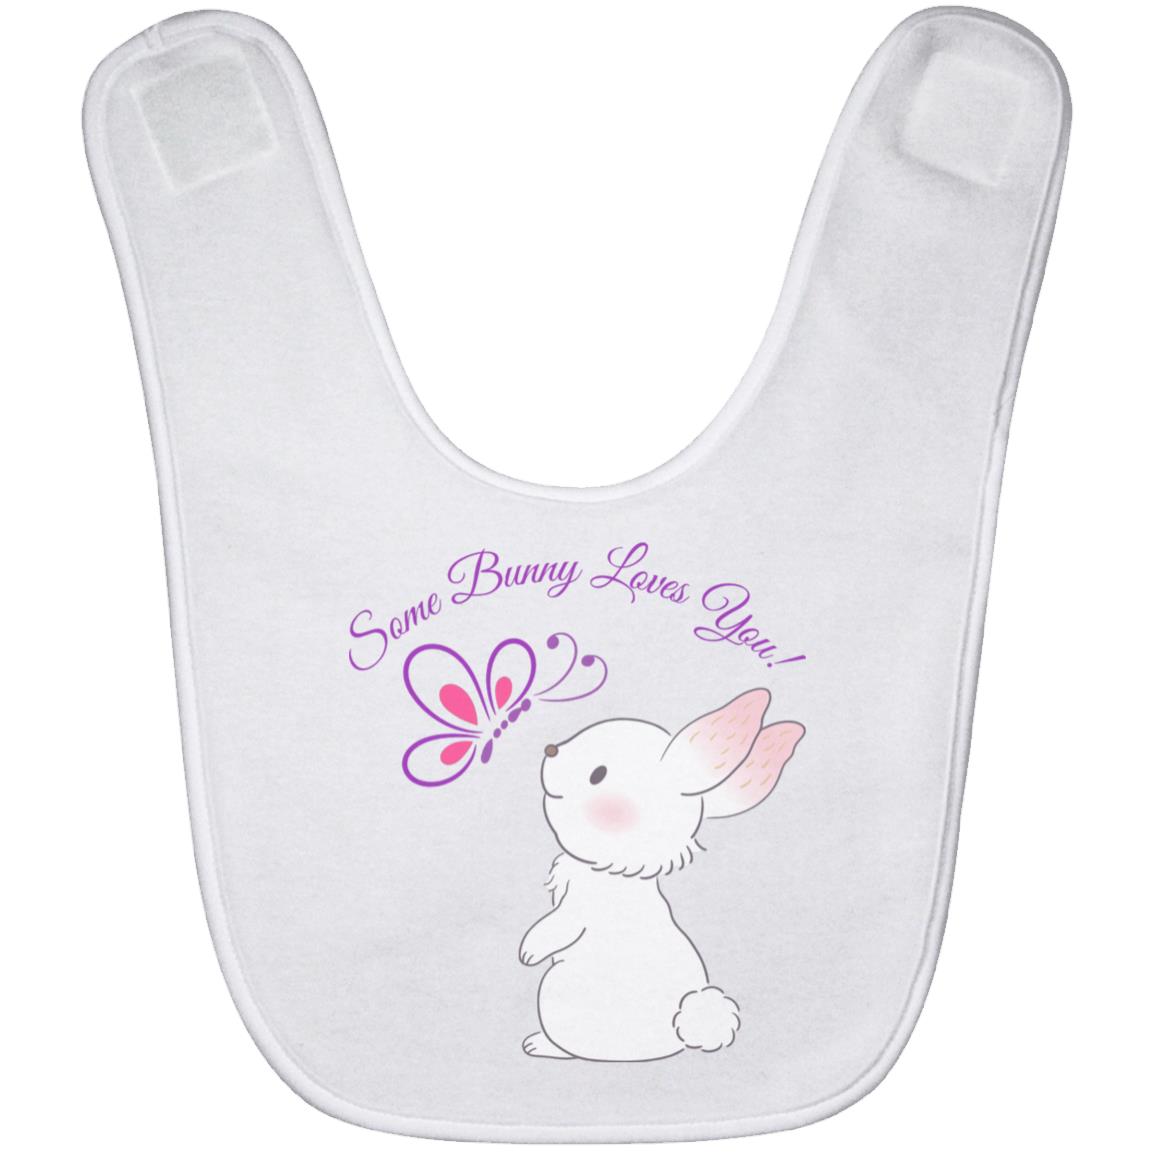 Some Bunny Loves You - Easter -  Baby Bib